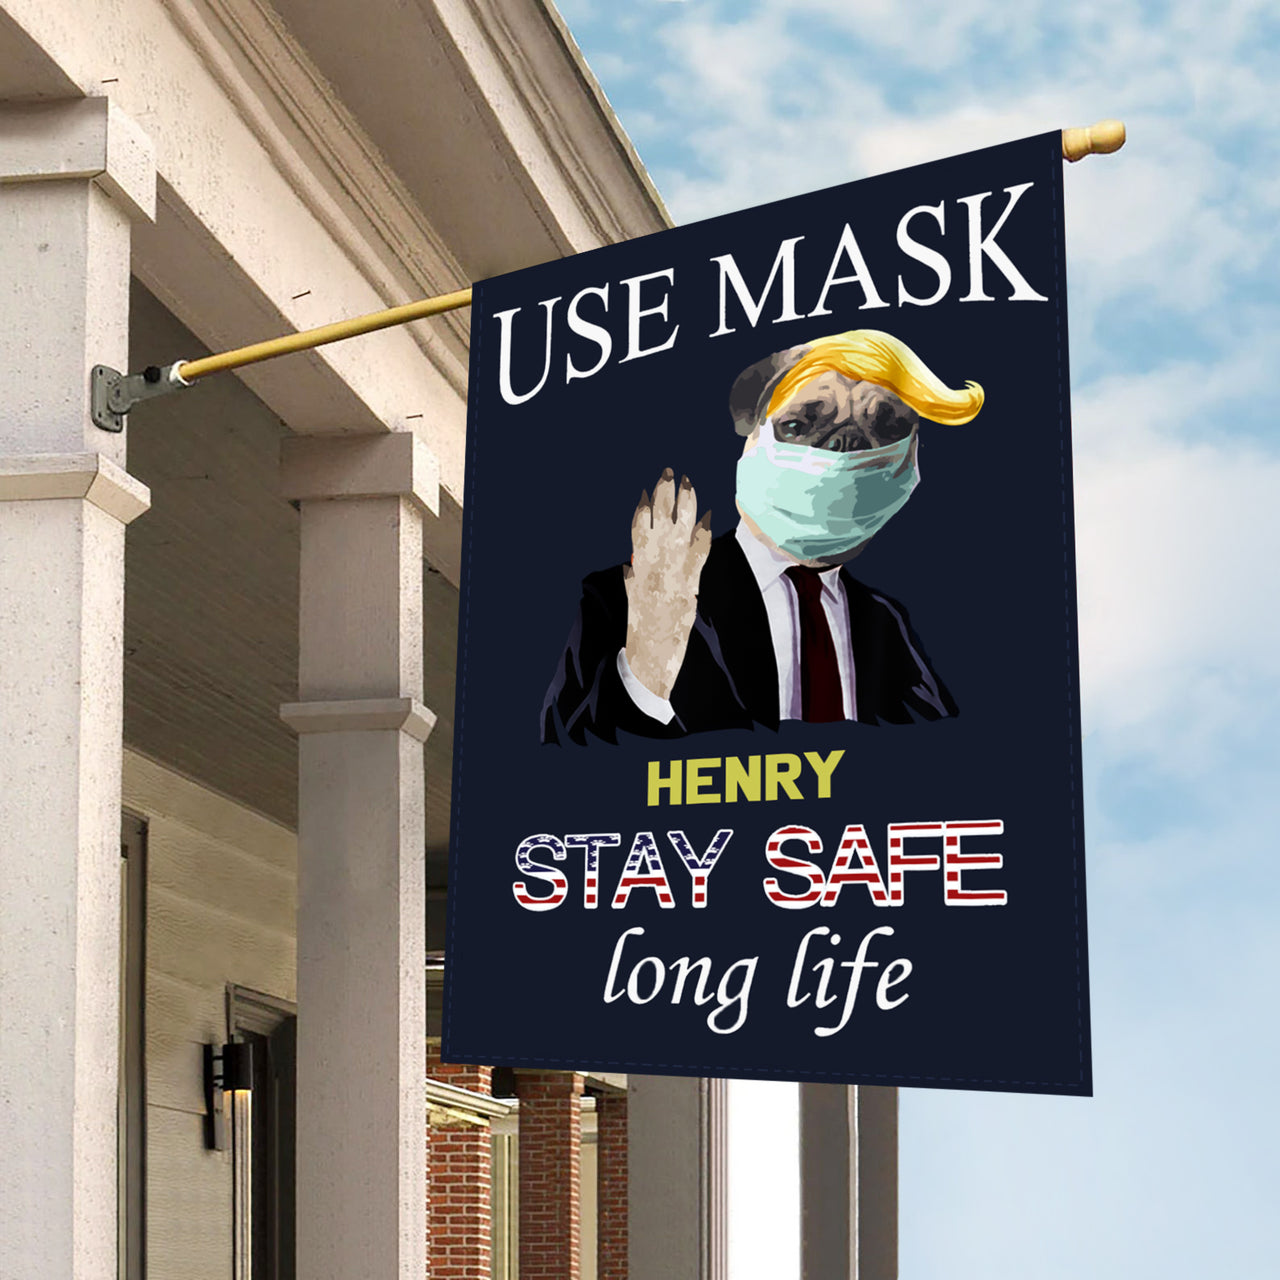 Personalized Dog Gift Idea - Workers Stay Safe Long Life Please Use Mask For Dog Lovers - Garden Flag